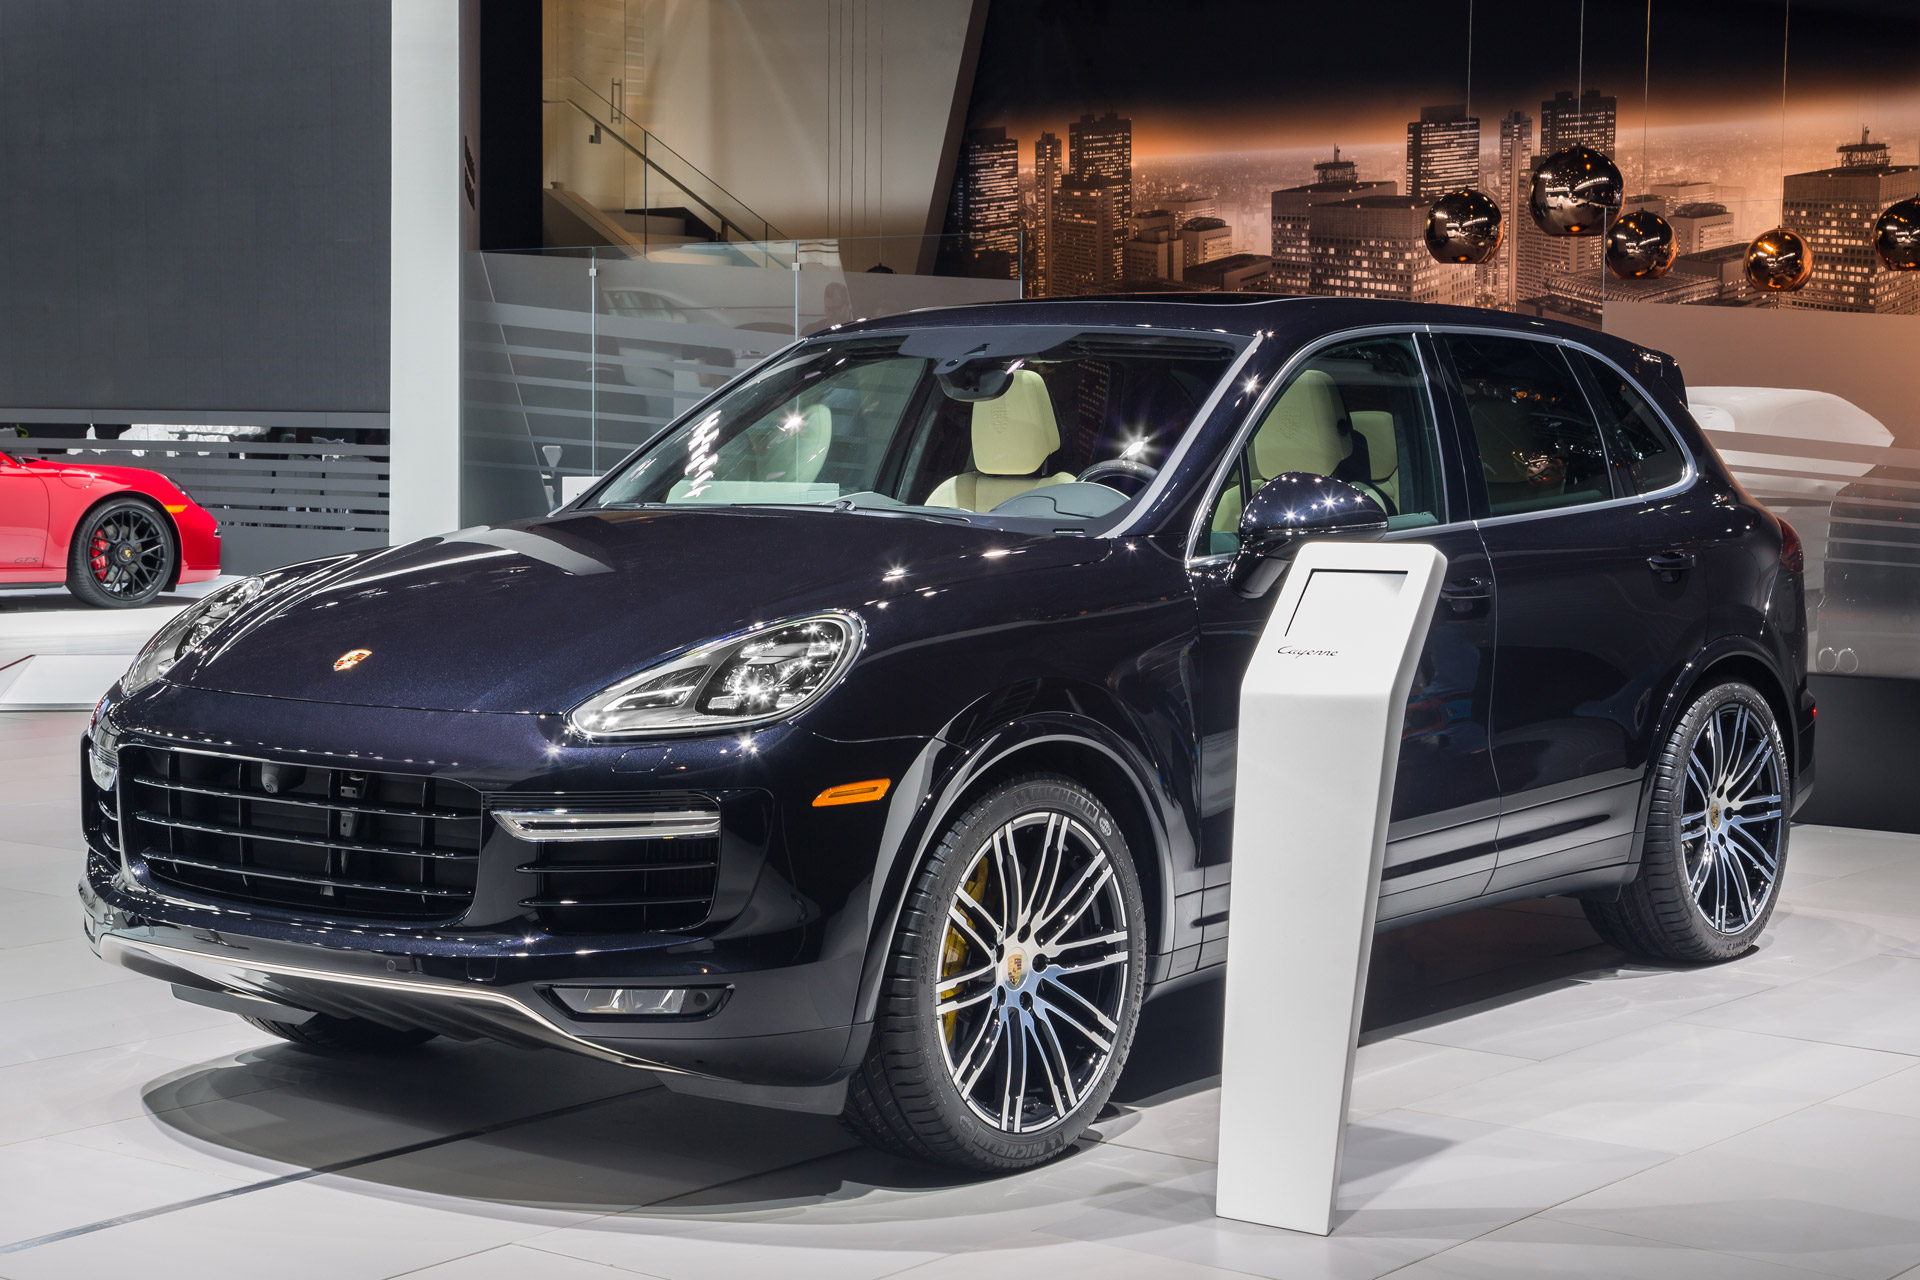 2016 Porsche Cayenne Turbo S: 570 HP And Sub-8-Minute 'Ring Time